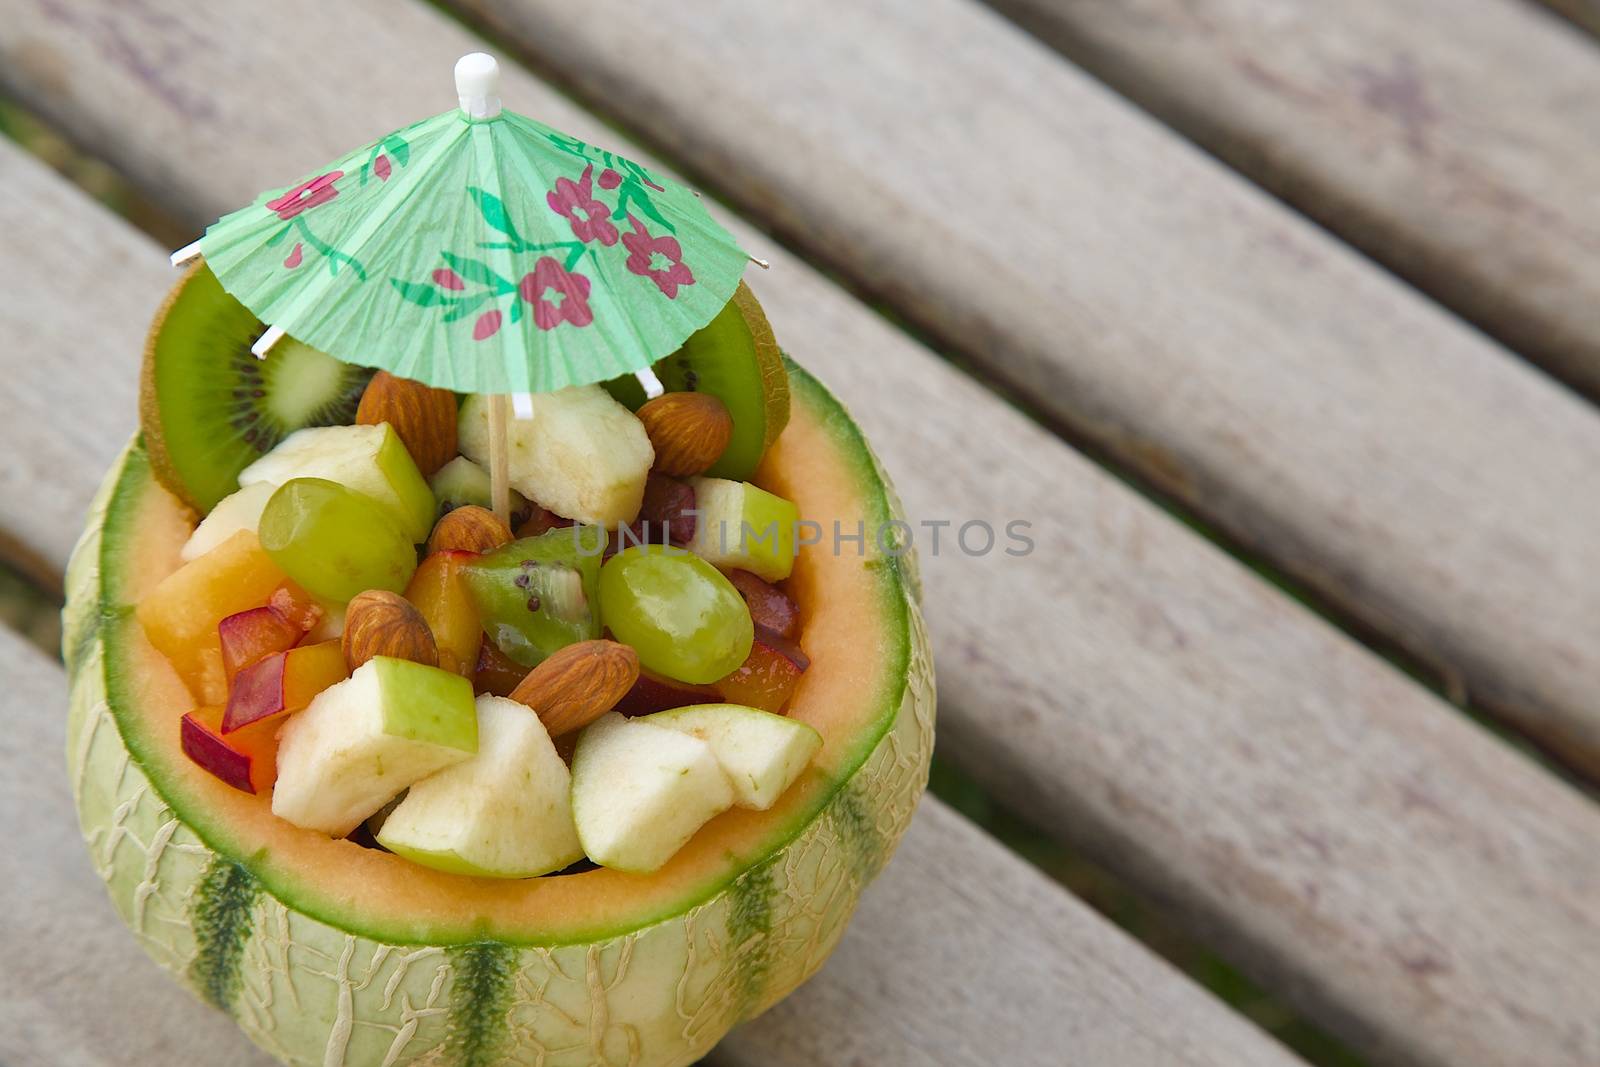 Vitamin dessert - fruit salad in the melon skin  by tolikoff_photography